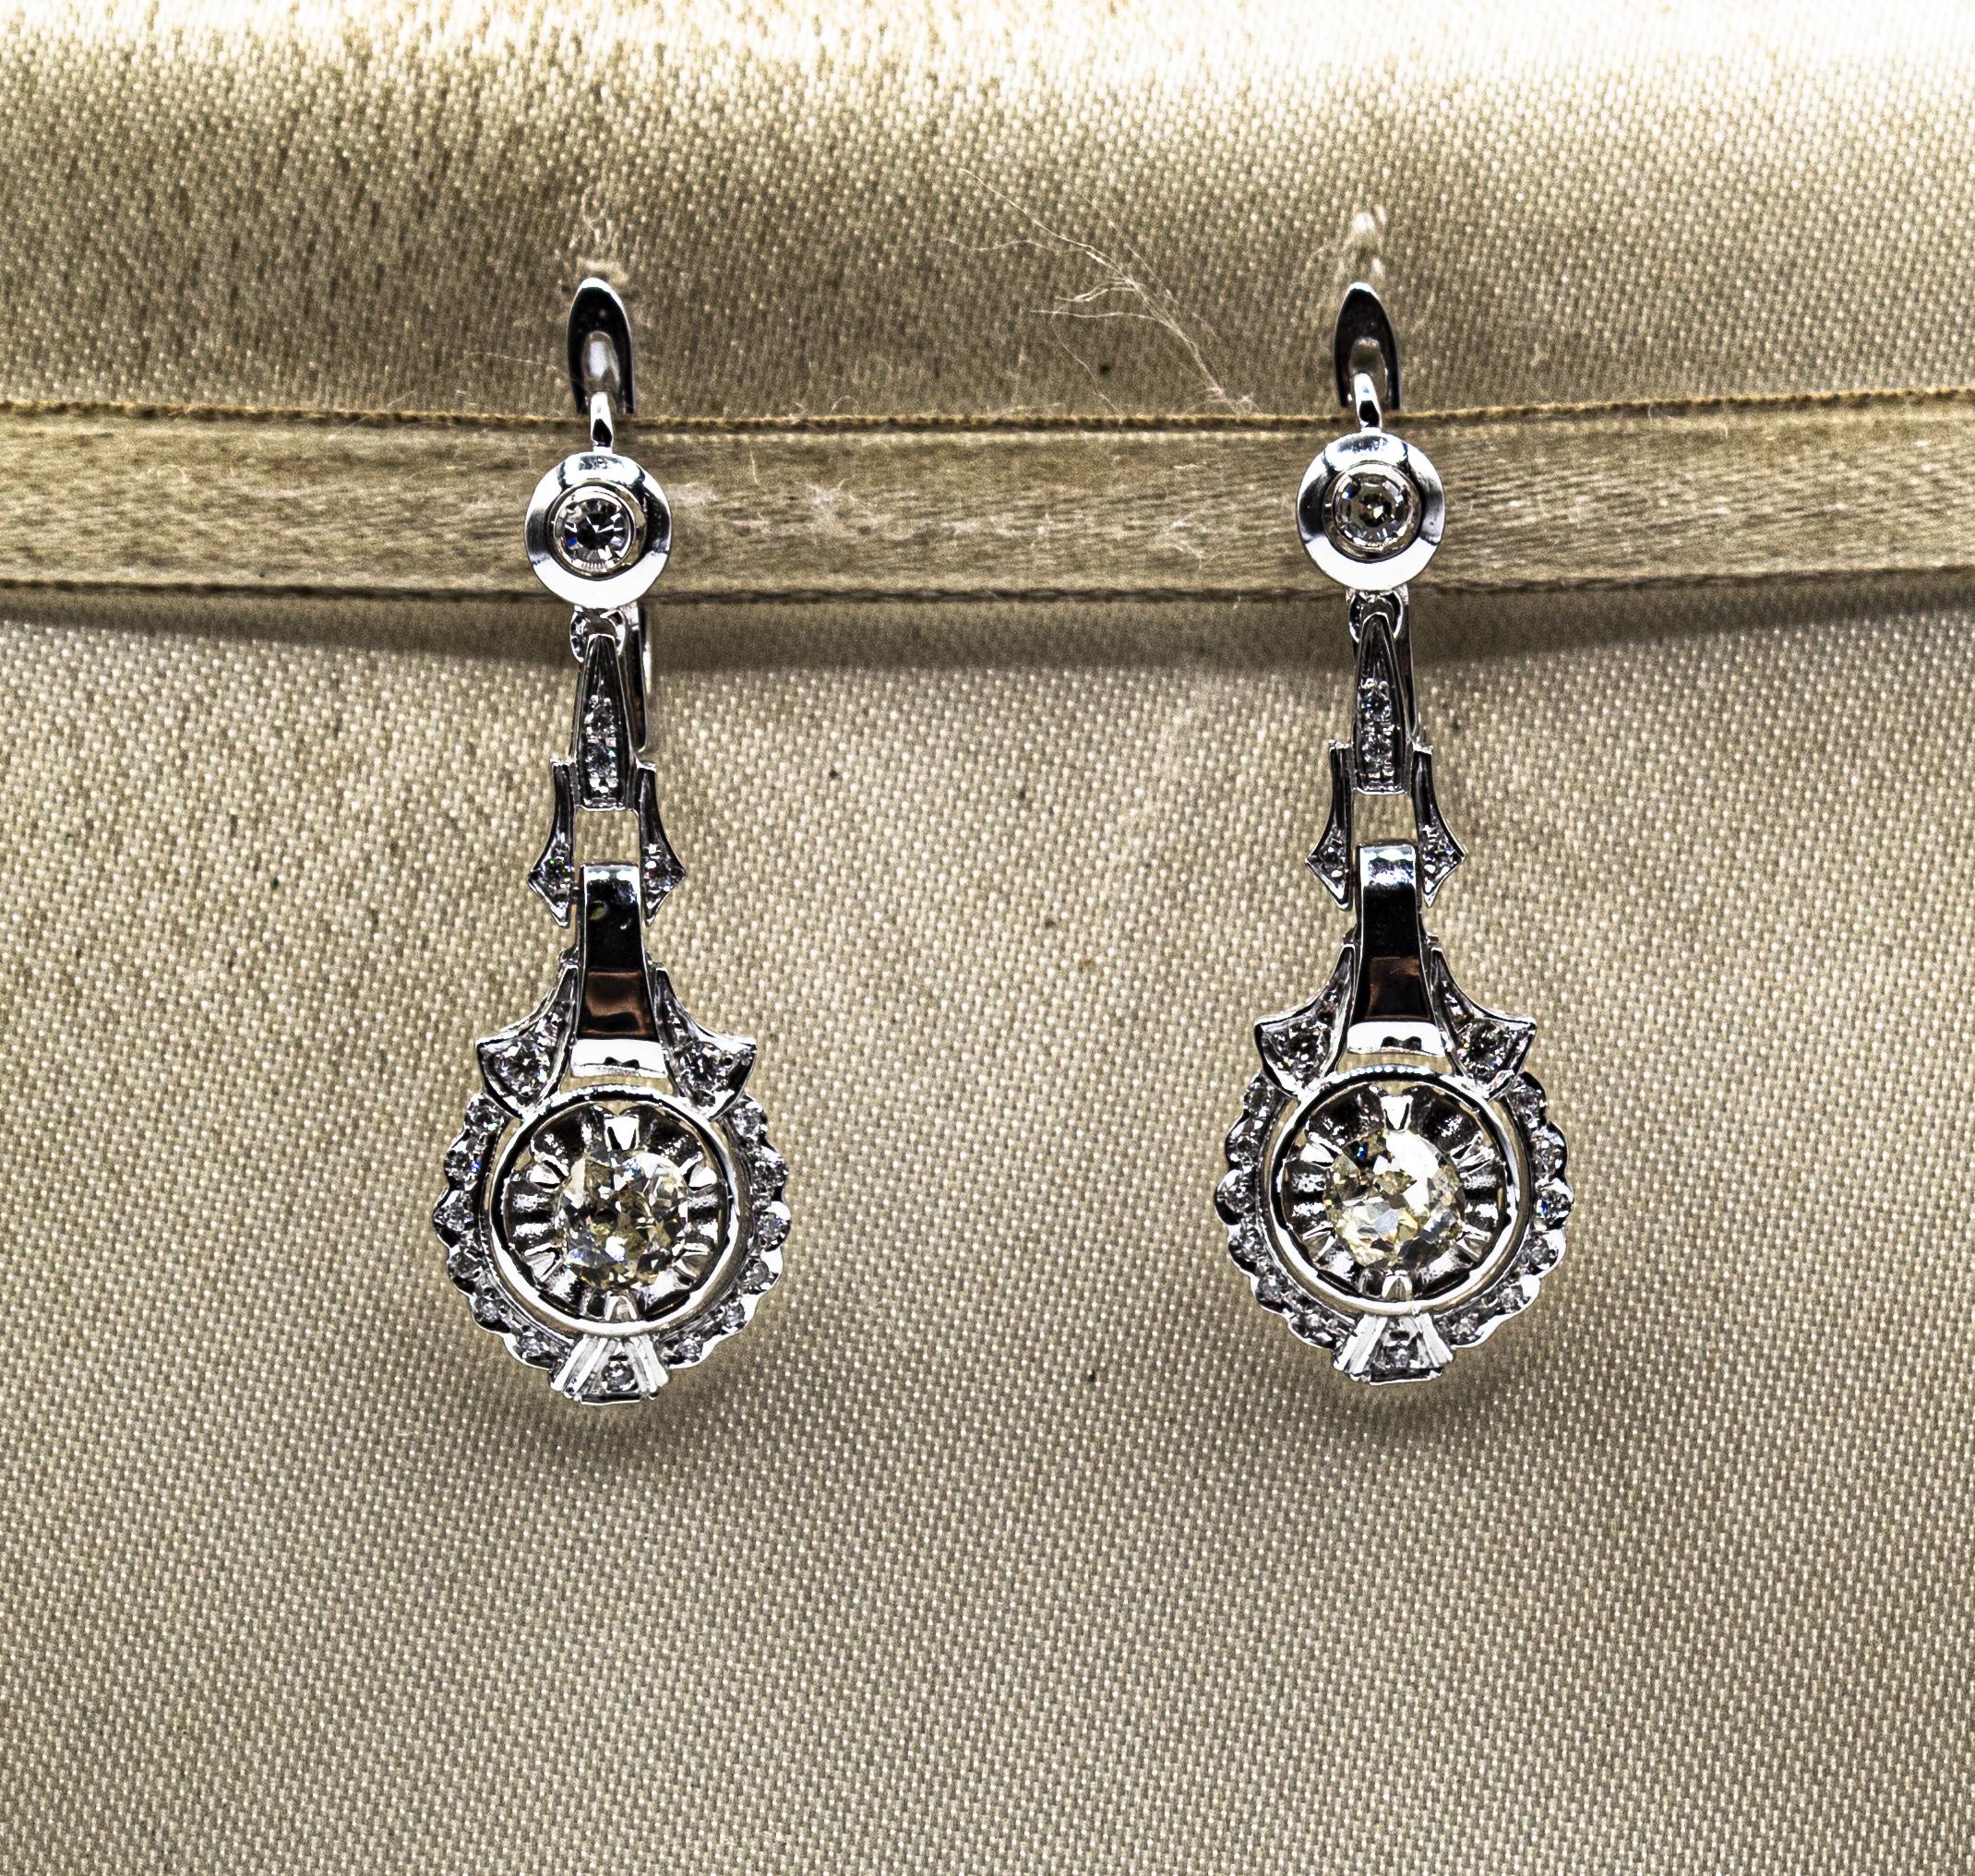 These Earrings are made of 18K White Gold.
These Earrings have 0.90 Carats of Central White Old European Cut Diamonds.
These Earrings have 0.20 Carats of White Brilliant Cut Diamonds.

These Earrings are inspired by Art Deco.

All our Earrings have